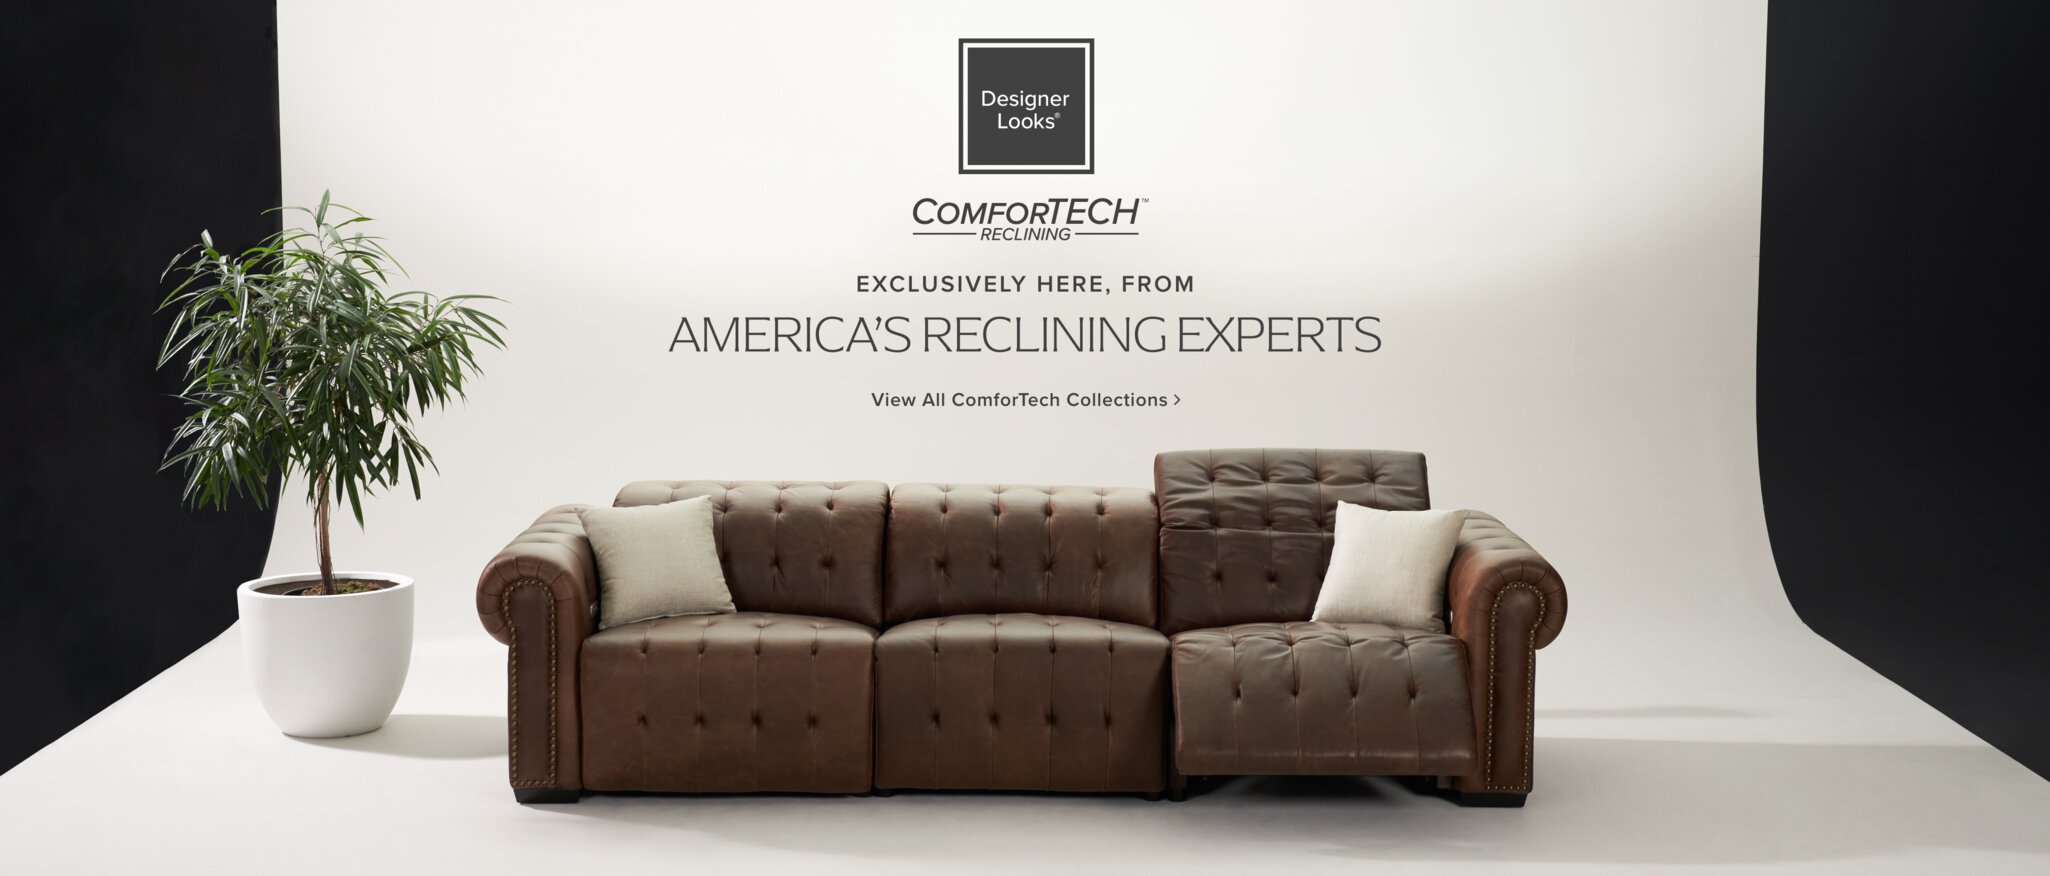 Designer Looks ComforTech Recling Exclusively Here, From America's Reclining Experts View All ComforTech Collections